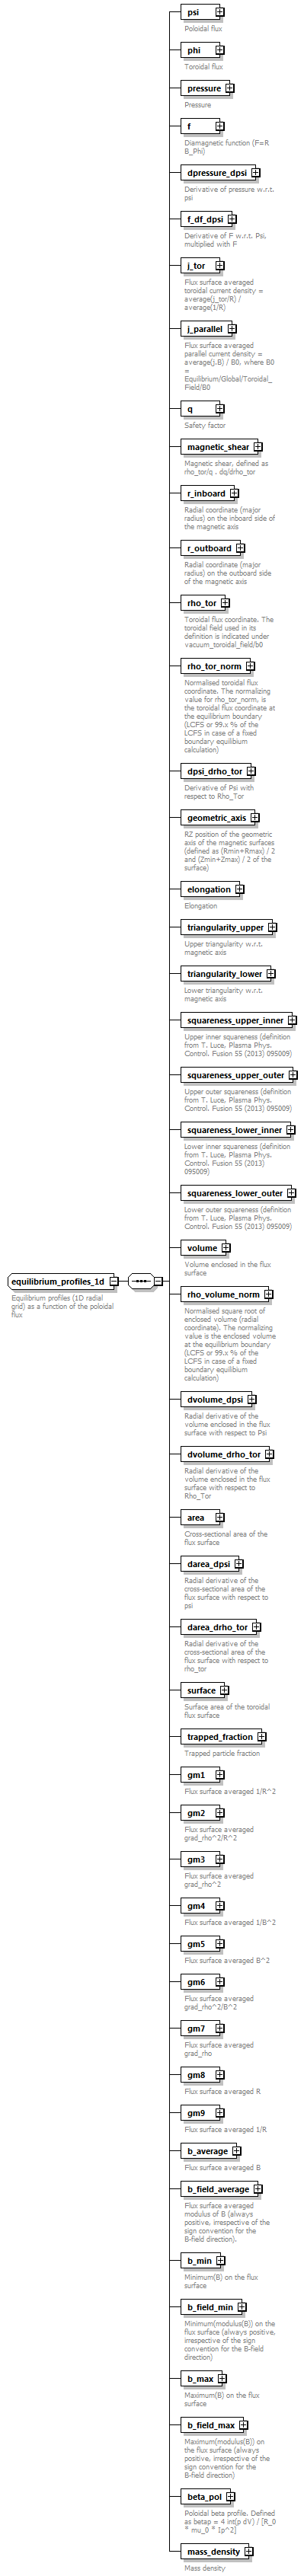 dd_data_dictionary.xml_p1936.png